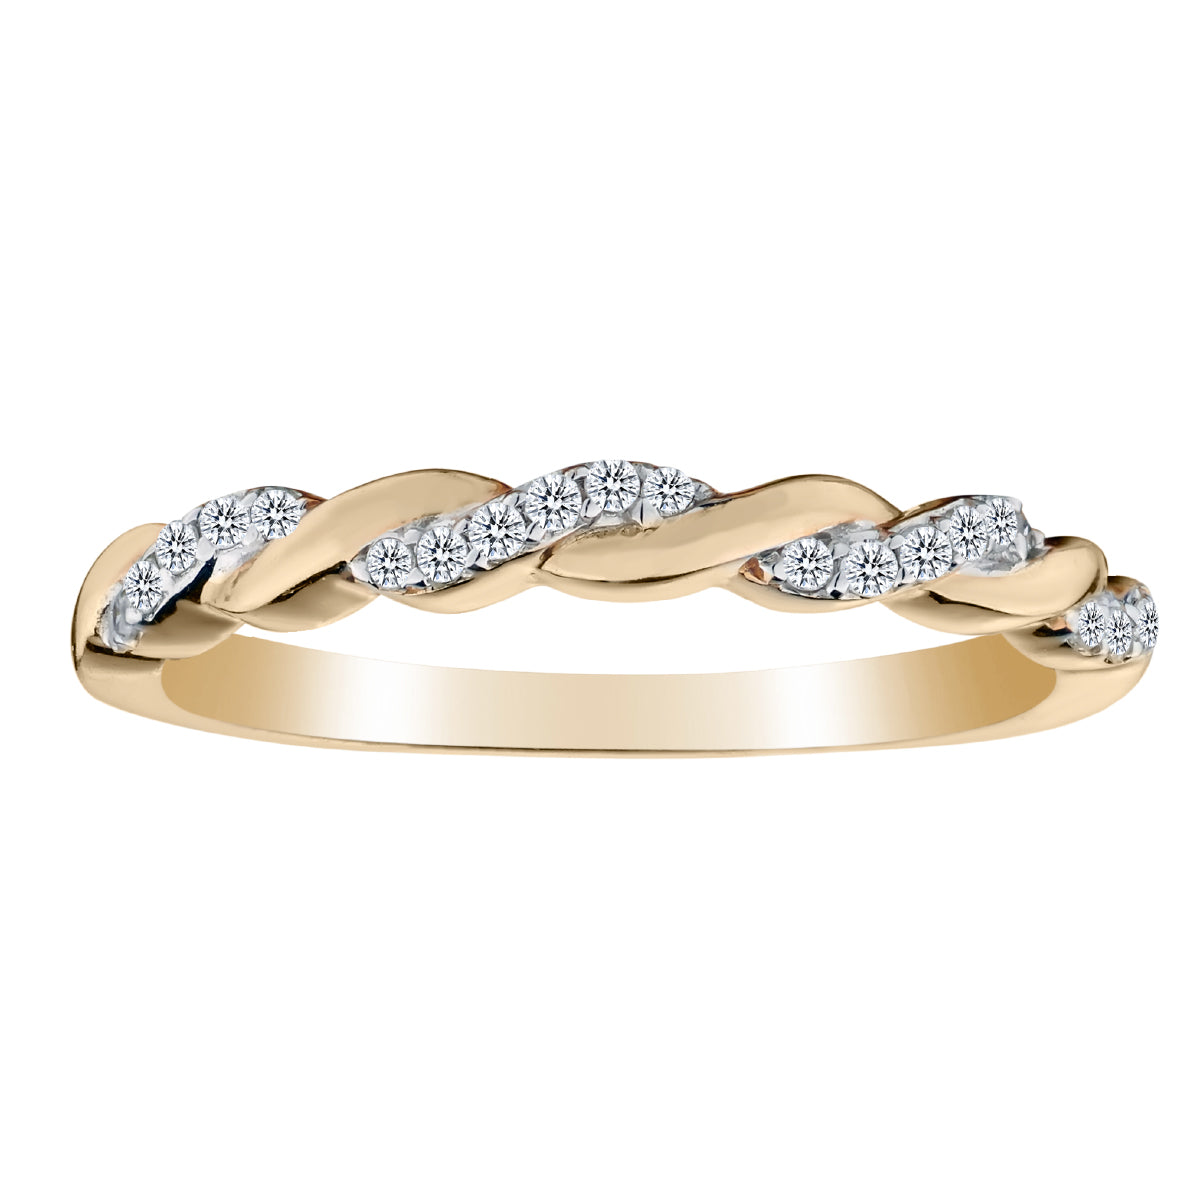 .15 Carat of Diamonds "Love Weaves" Band, 14kt Yellow Gold.....................NOW